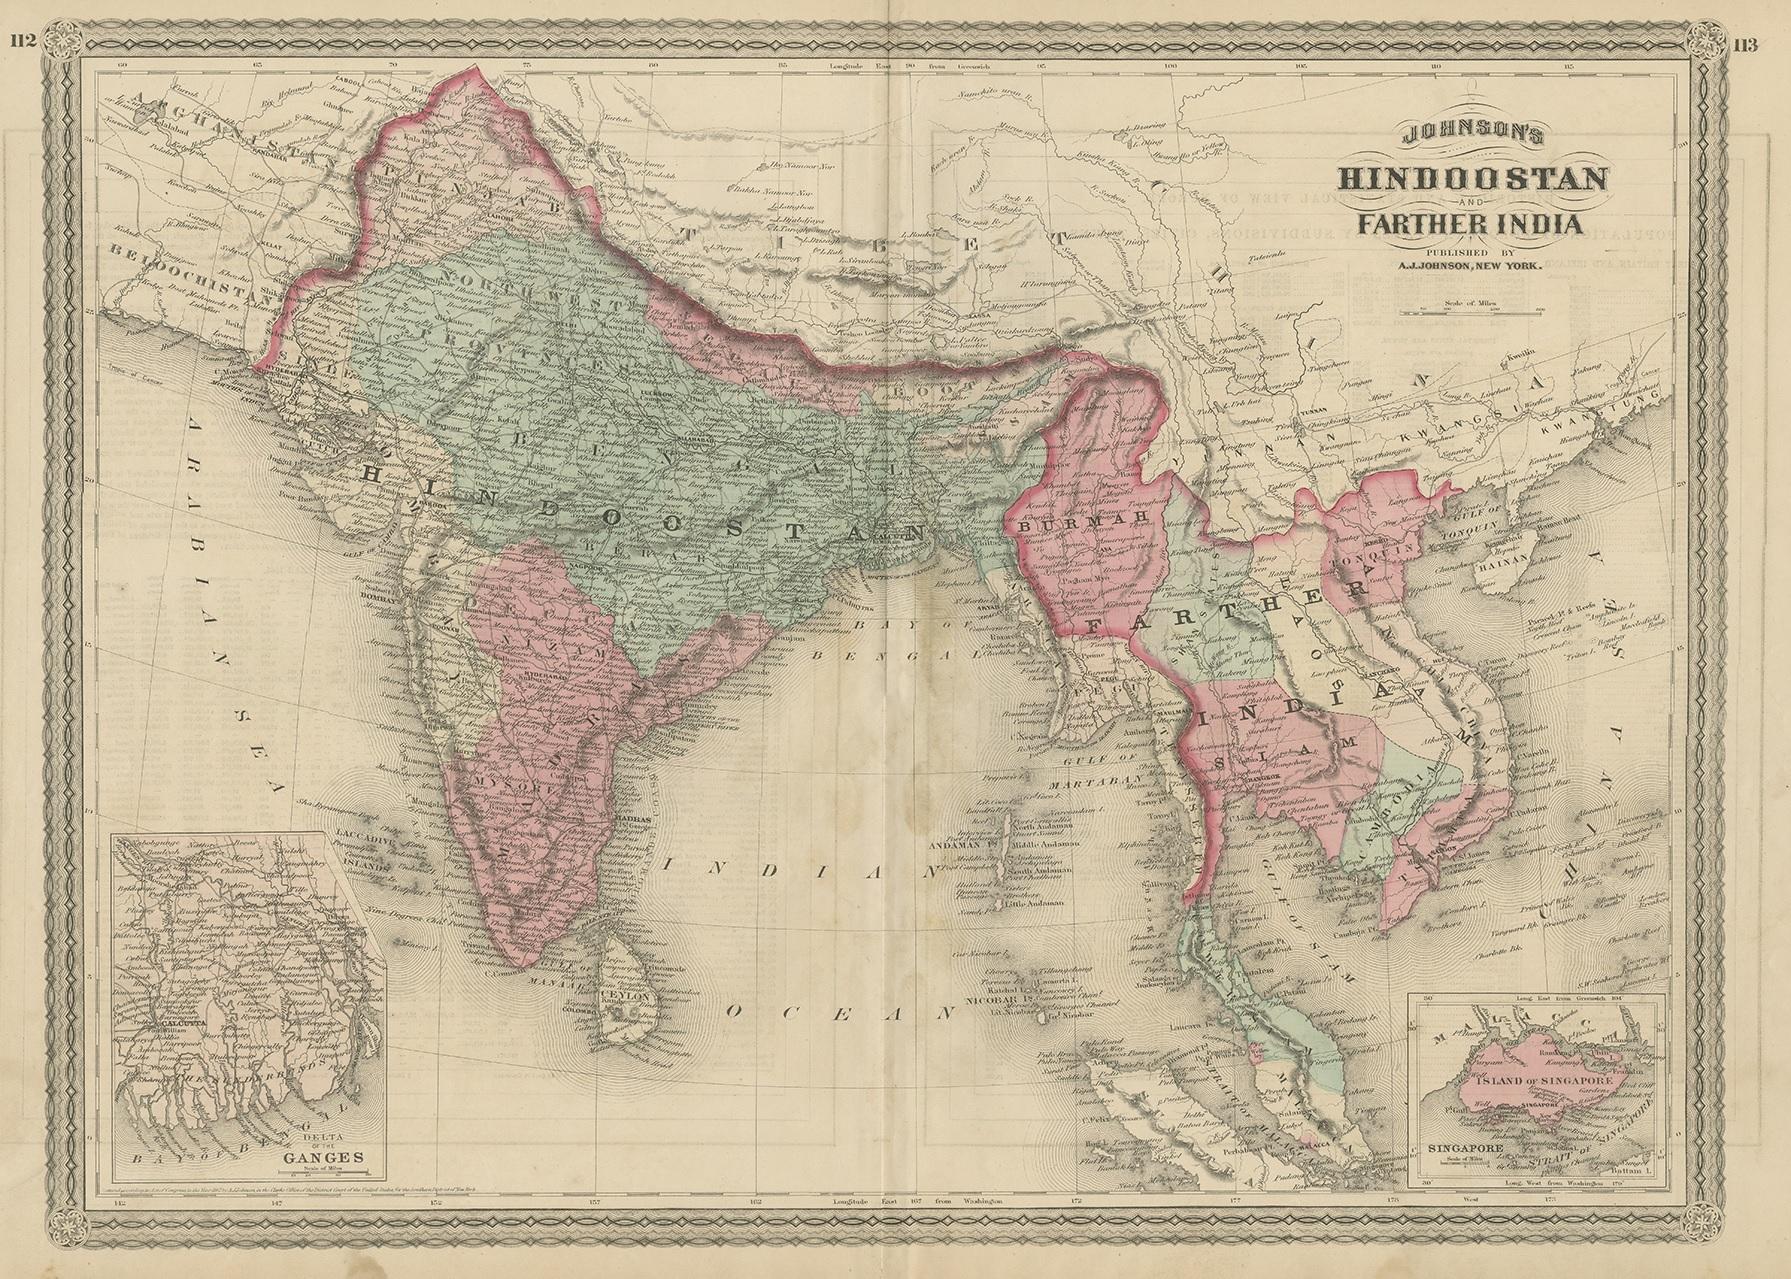 Antique map titled 'Johnson's Hindoostan and Farther India (..)'. Map of Southeast Asia with inset maps of the Delta of the Ganges and Singapore. This map originates from 'Johnson's New Illustrated Family Atlas of the World' by A.J. Johnson.